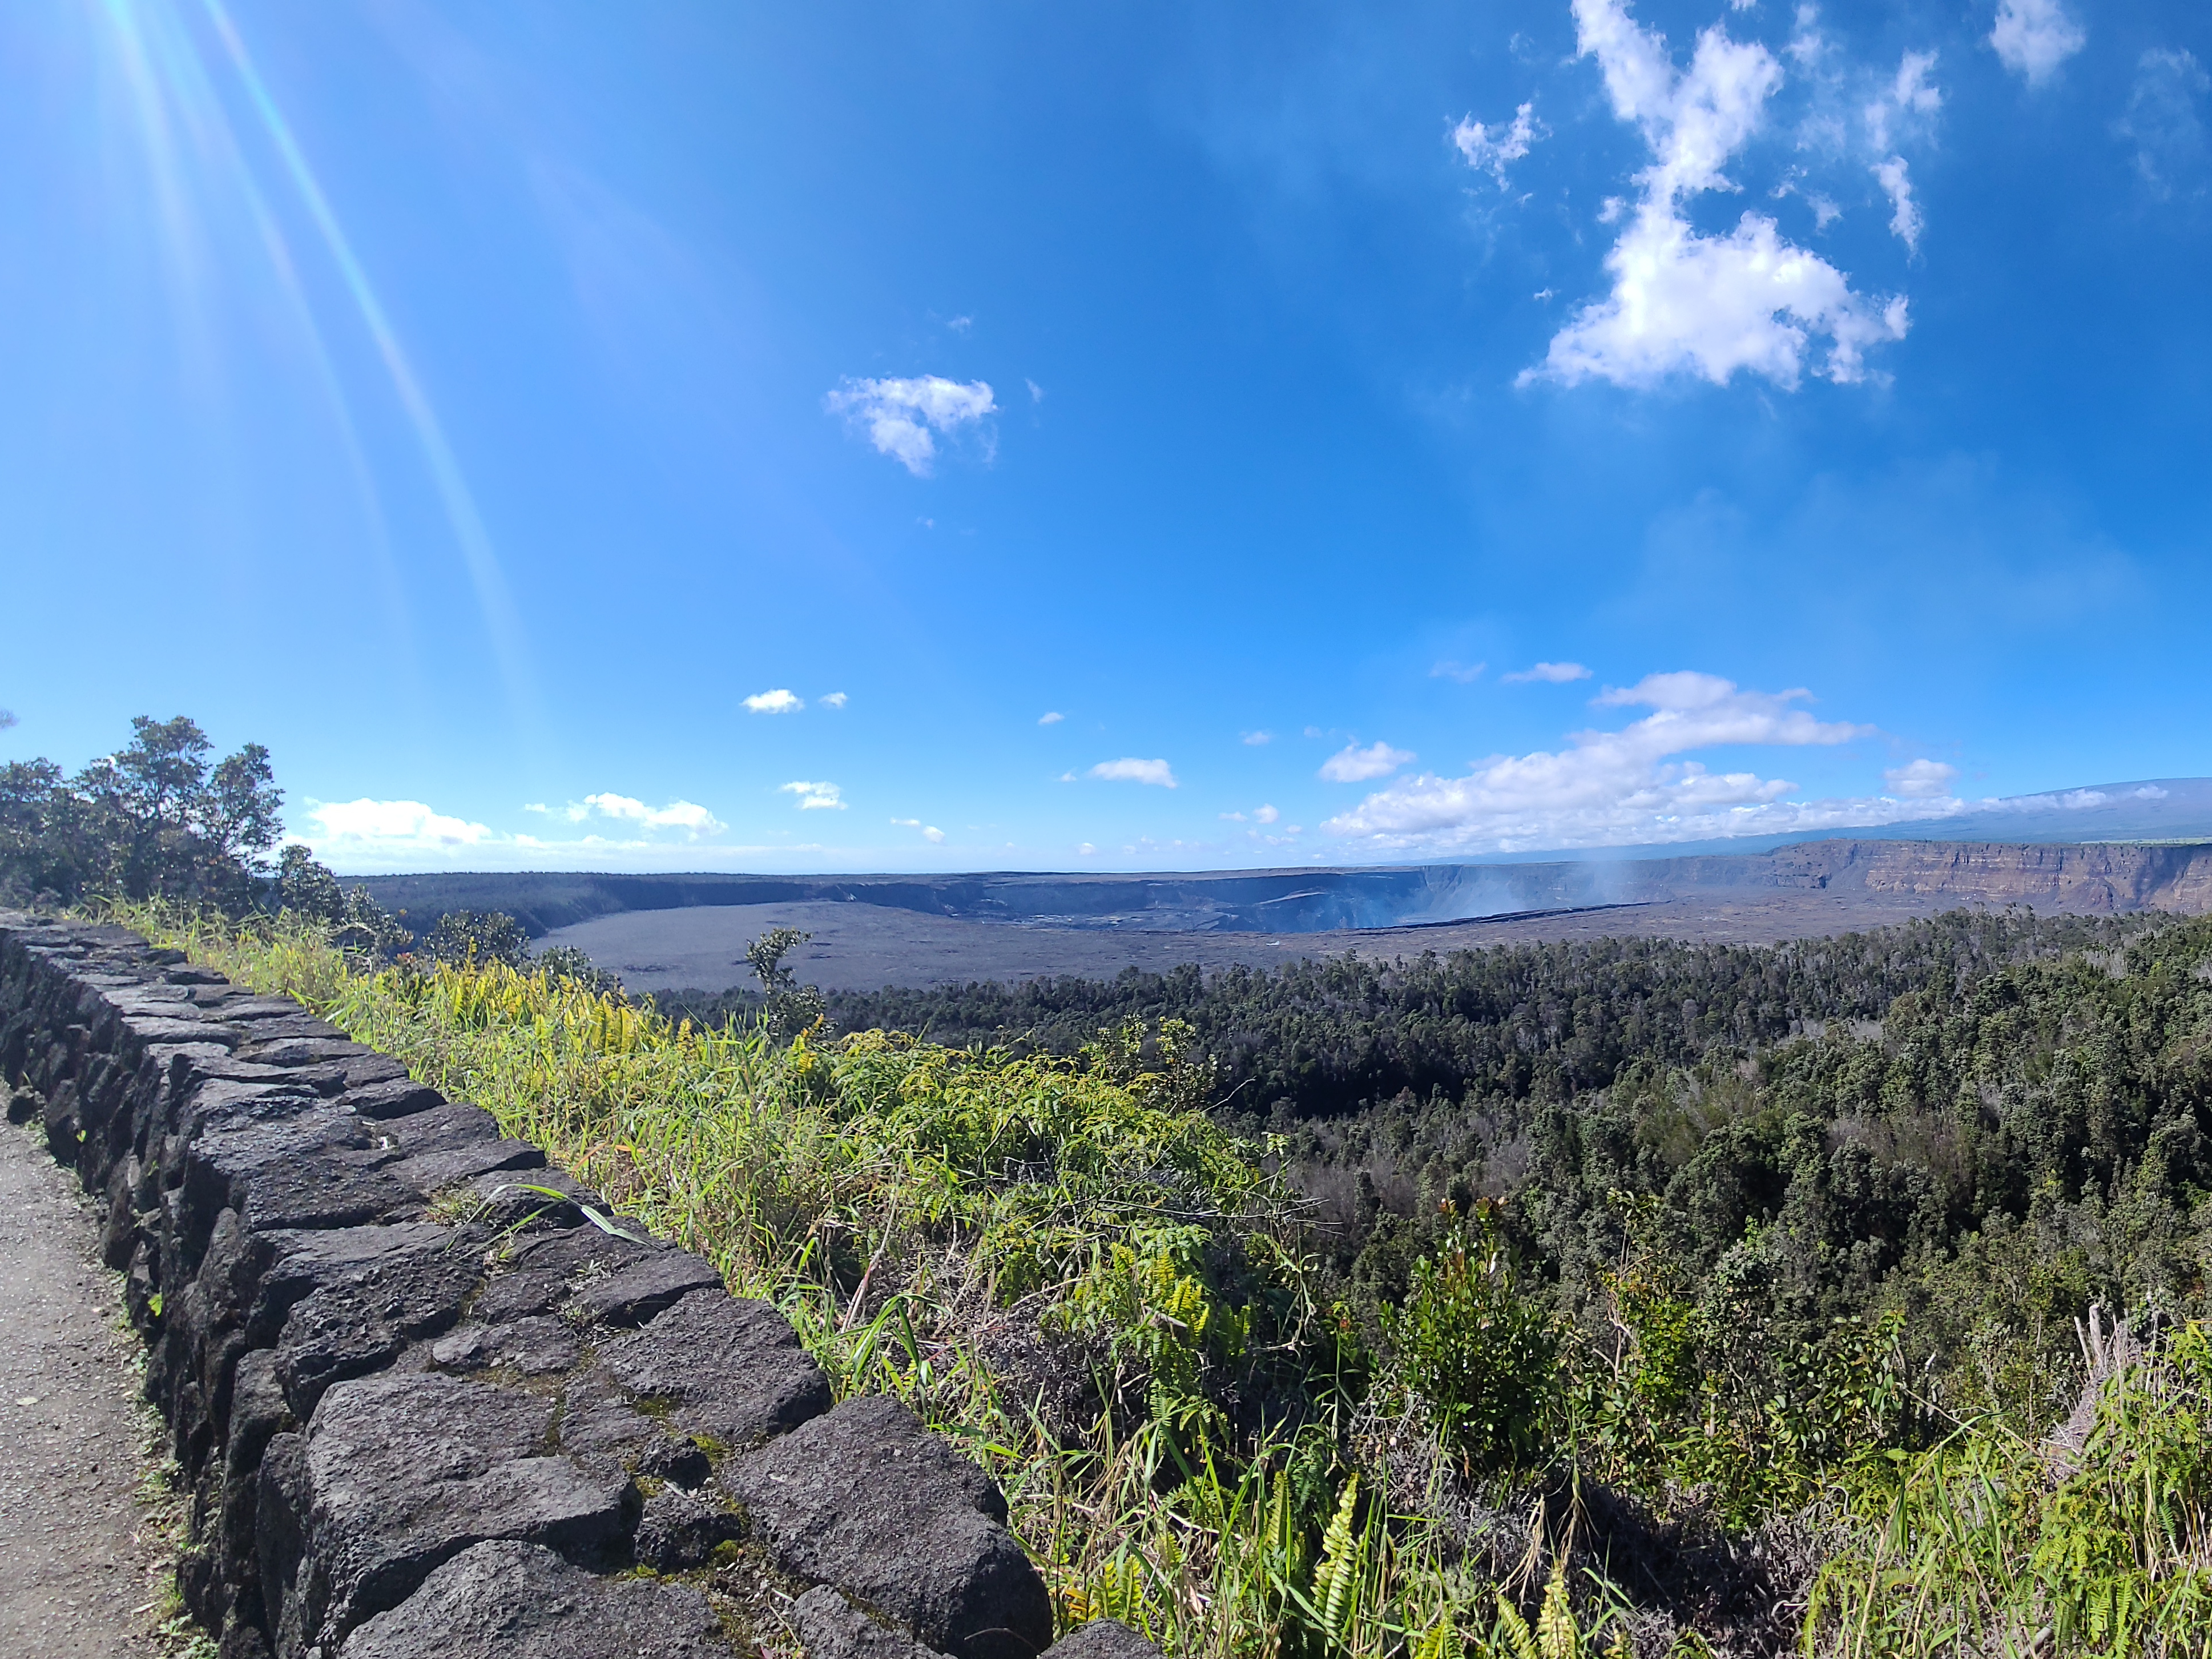 A photo of the Halemaʻumaʻu Crater from behind the Volcano House on the rim trail